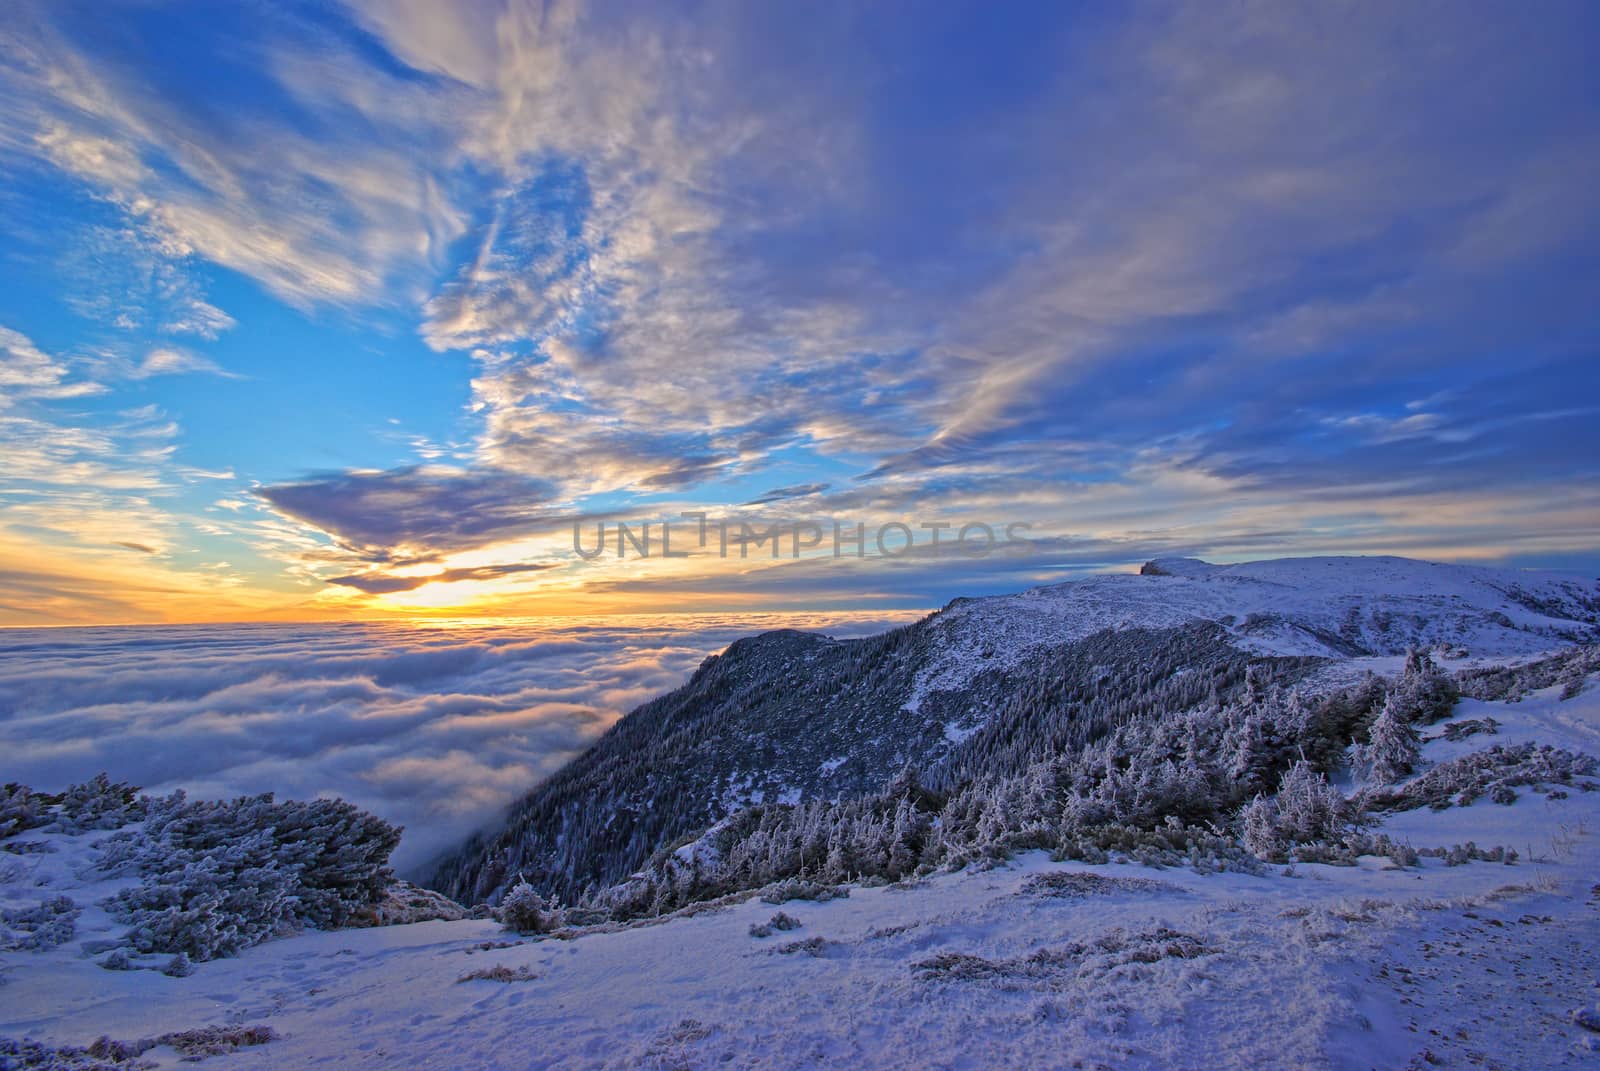 Winter scene in Romanian Carpathians, frozen nature and low clouds